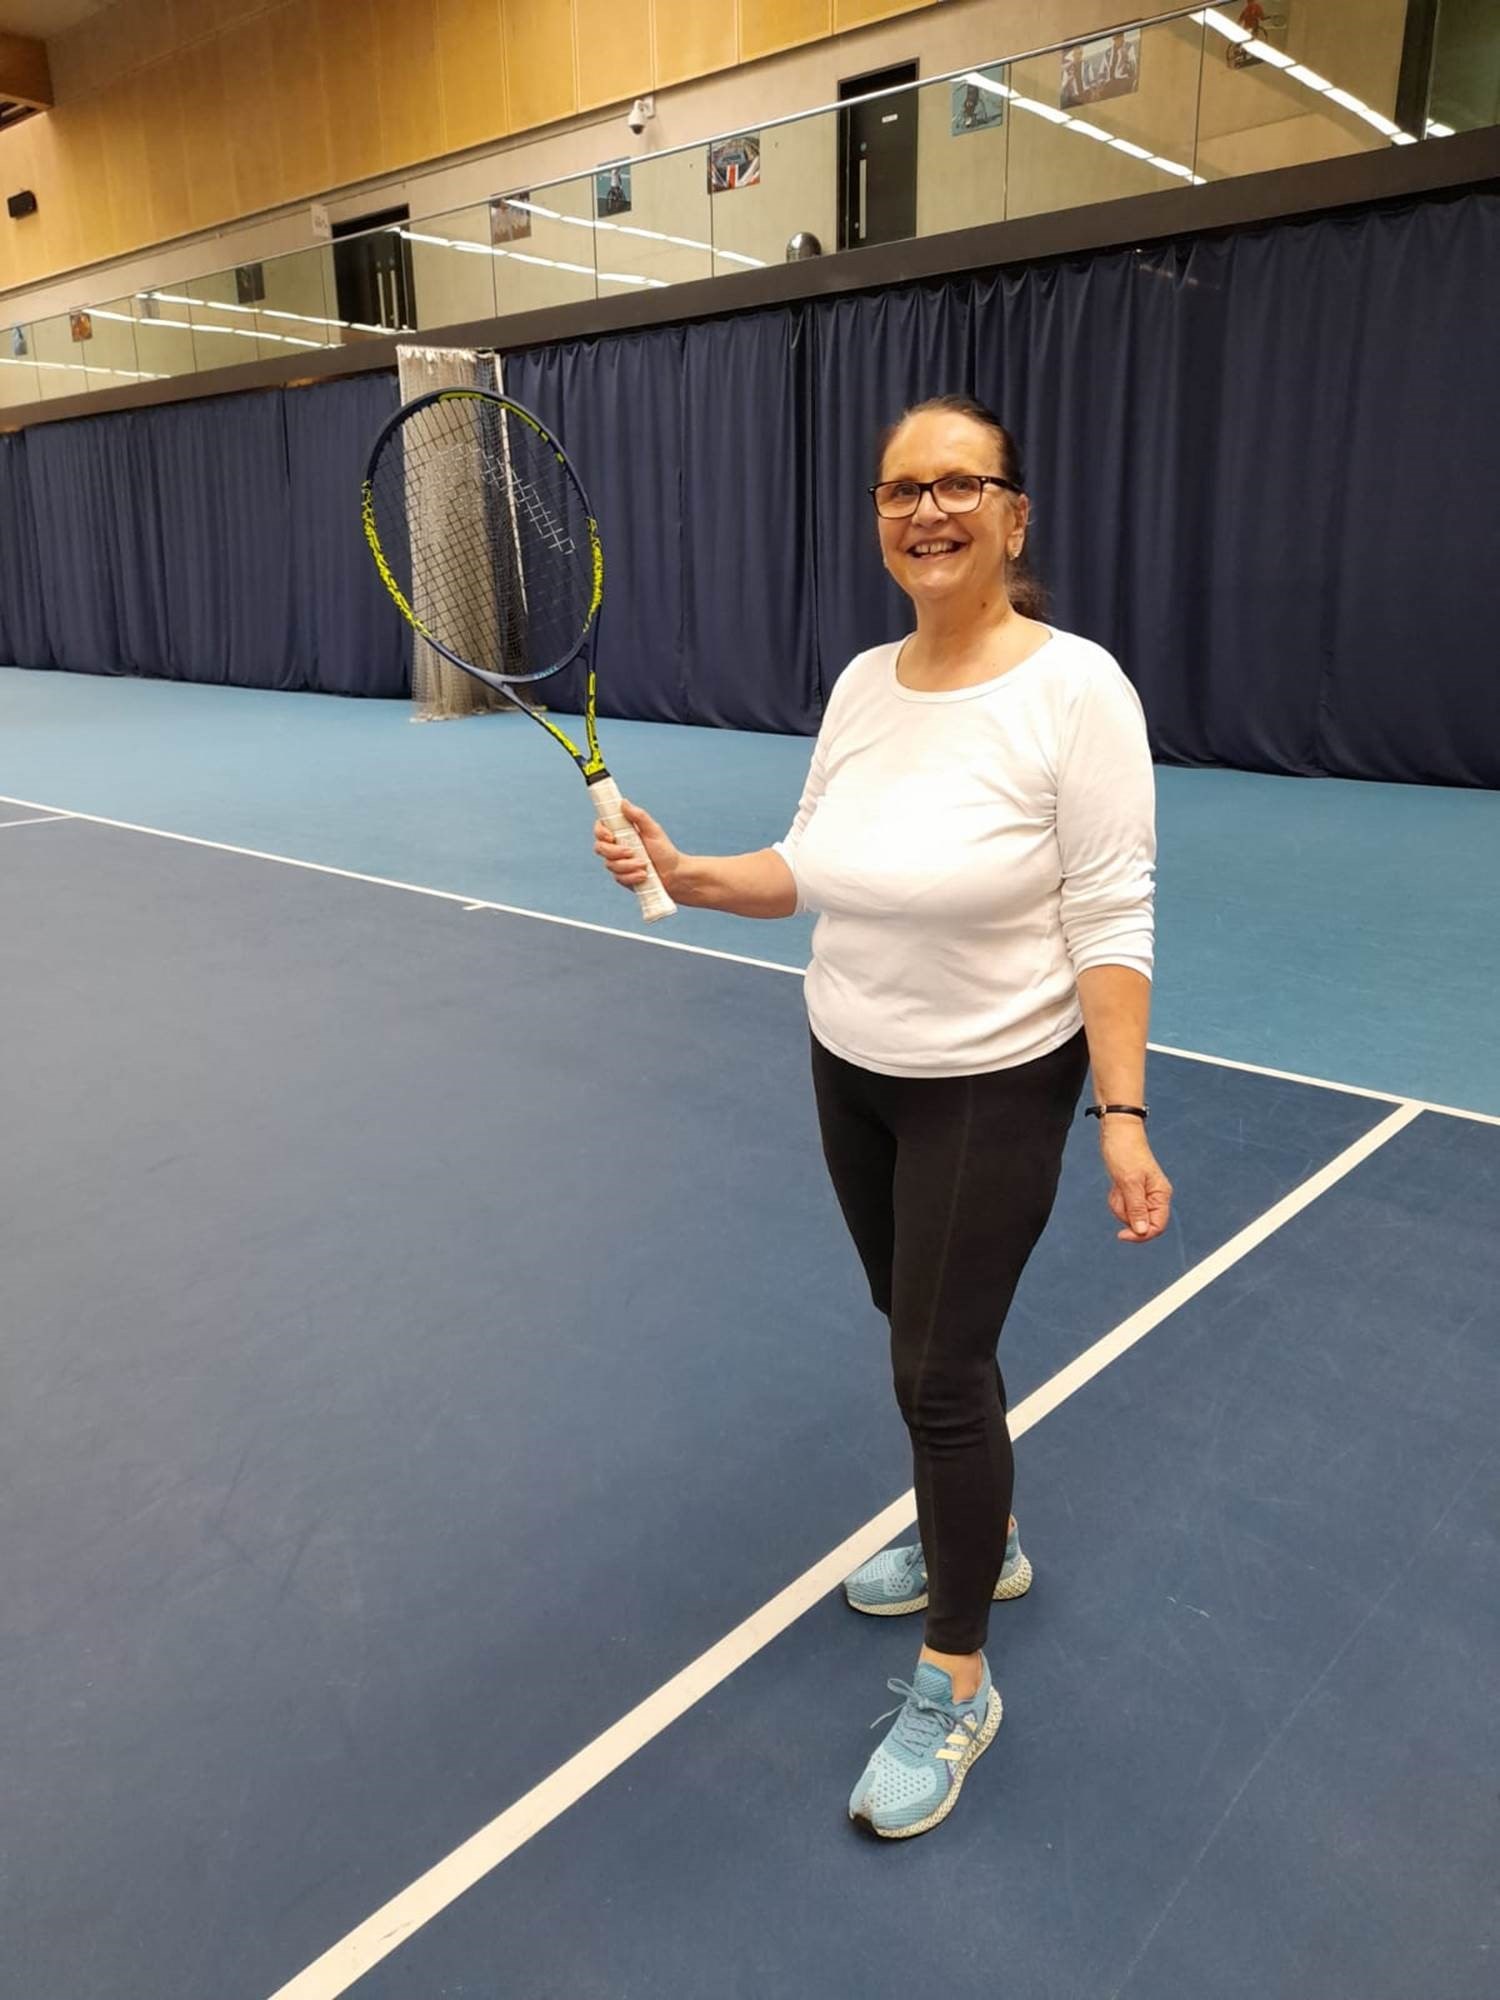 A member of Lee Valley Hockey and Tennis Centre posing for a photo on court during an Open Court session